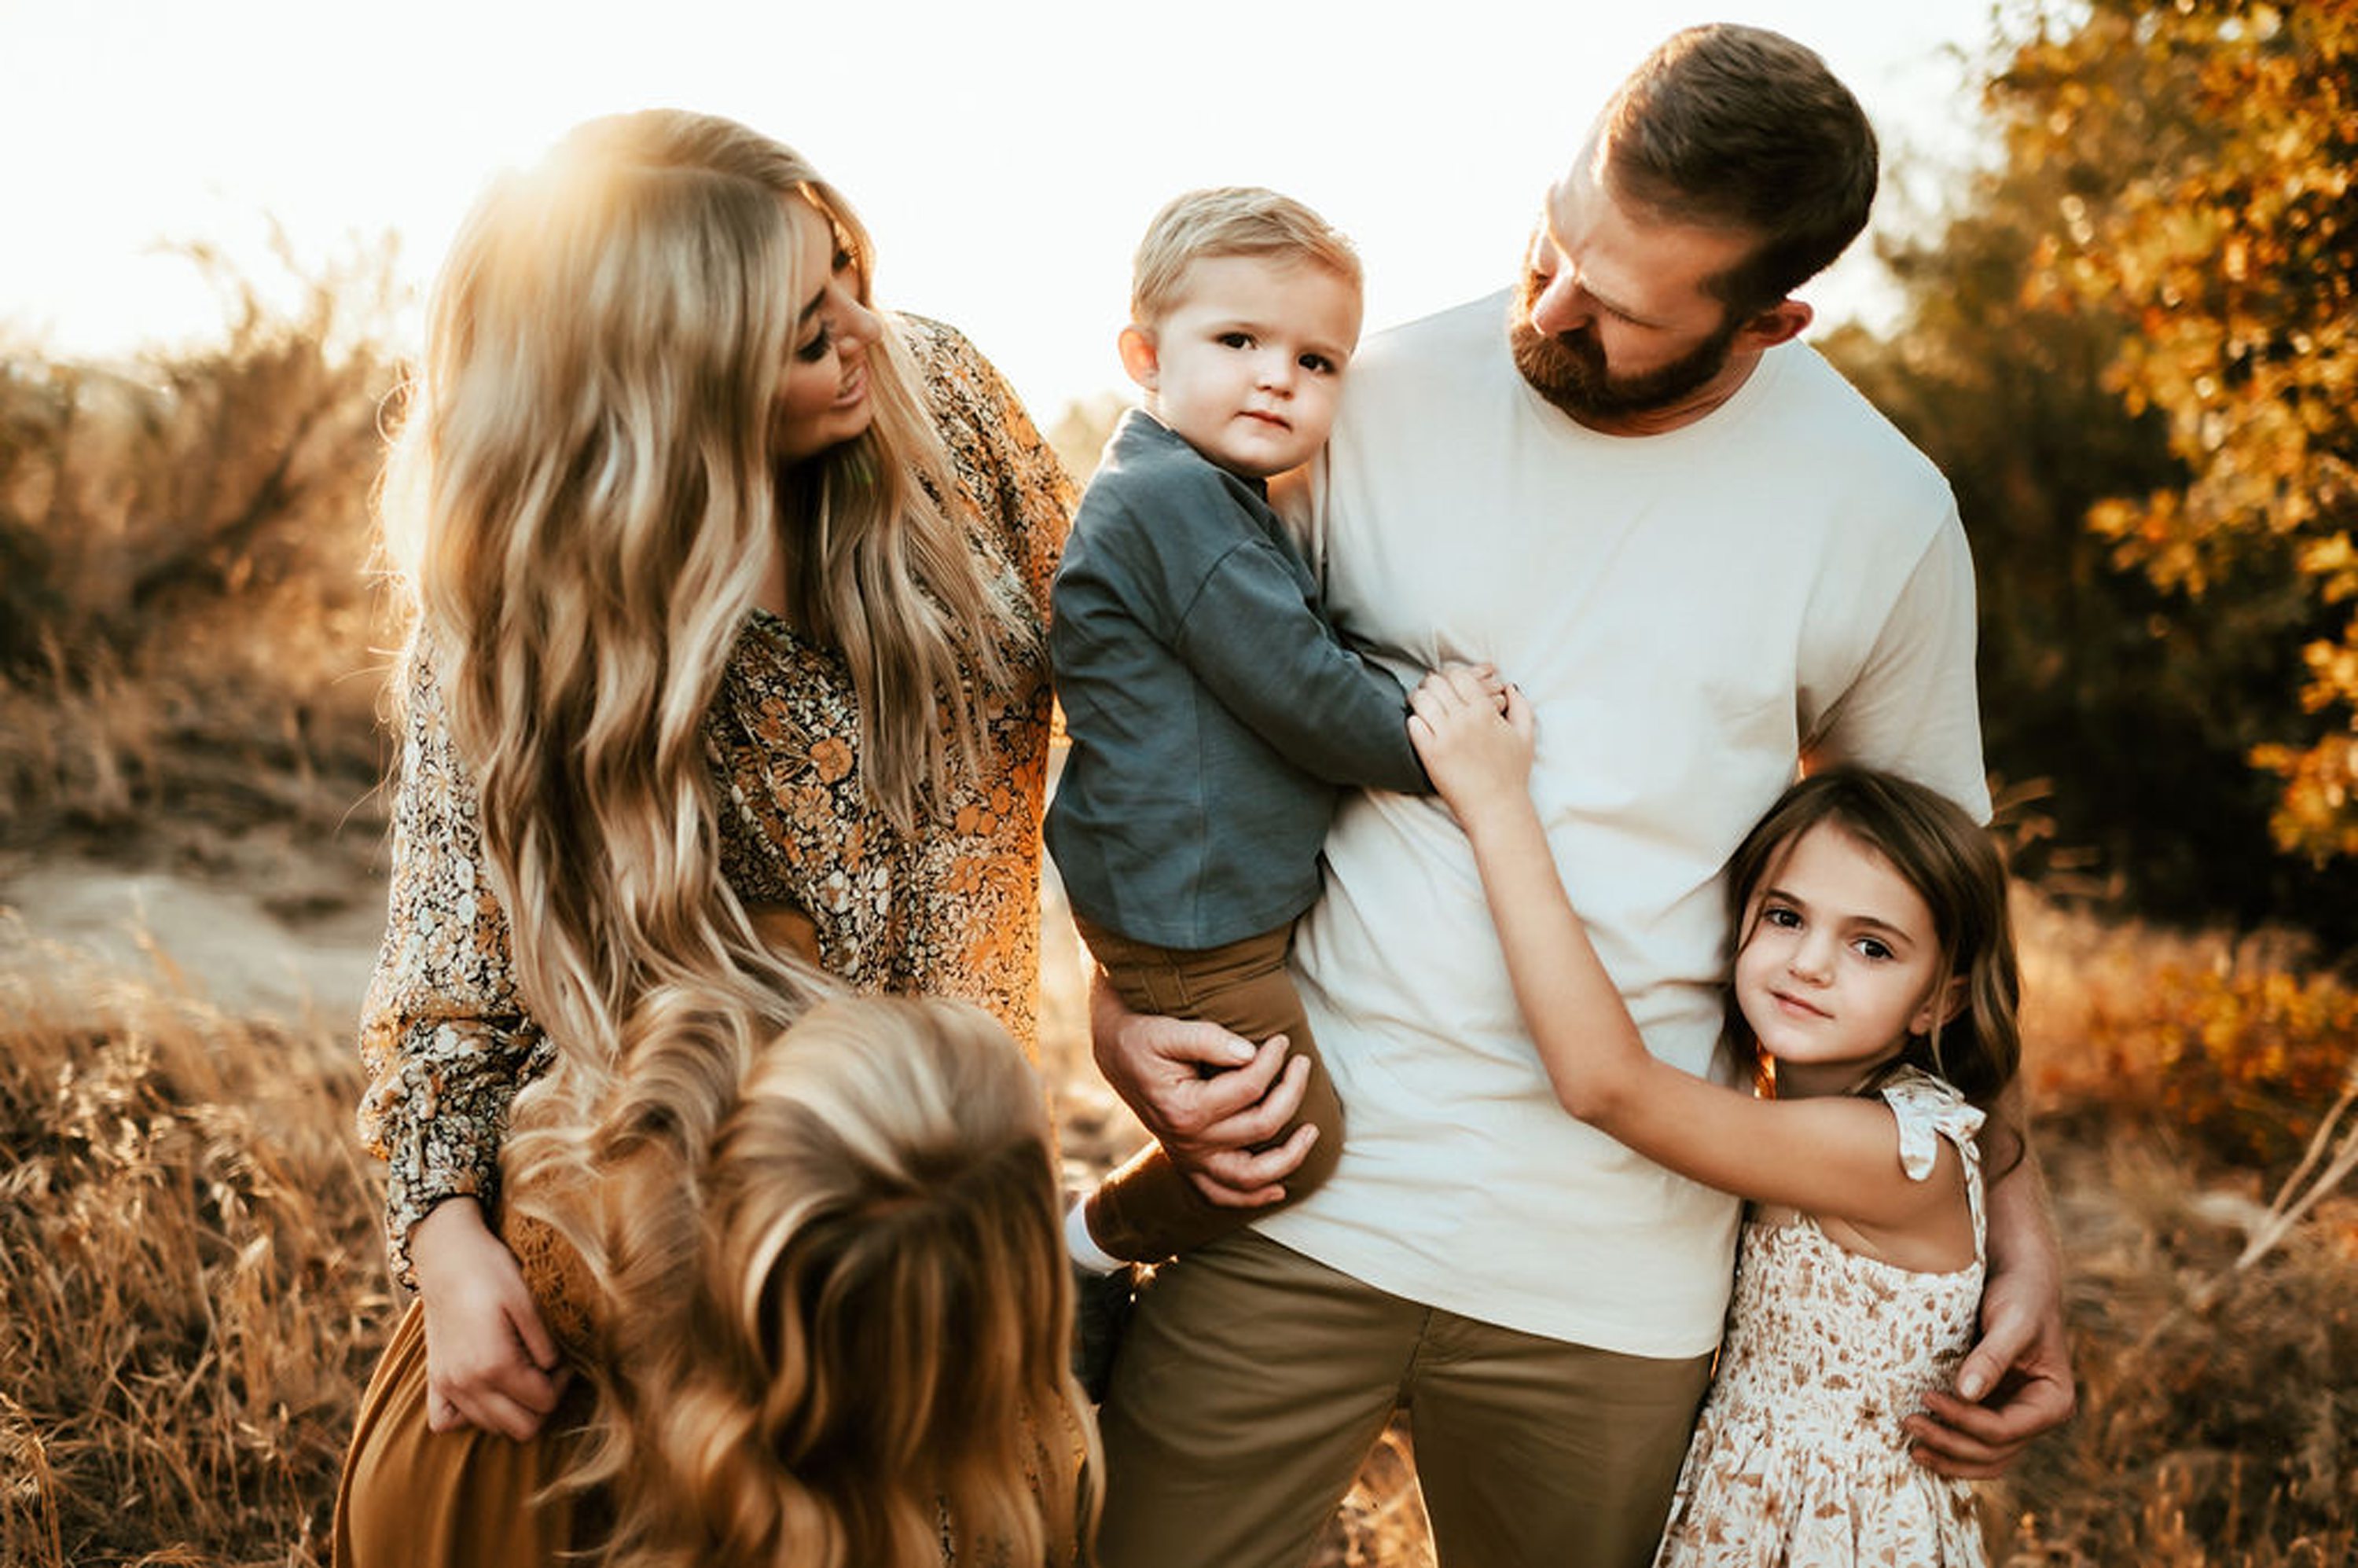 6 Simple Family Photo Poses and Tips for the Photographer